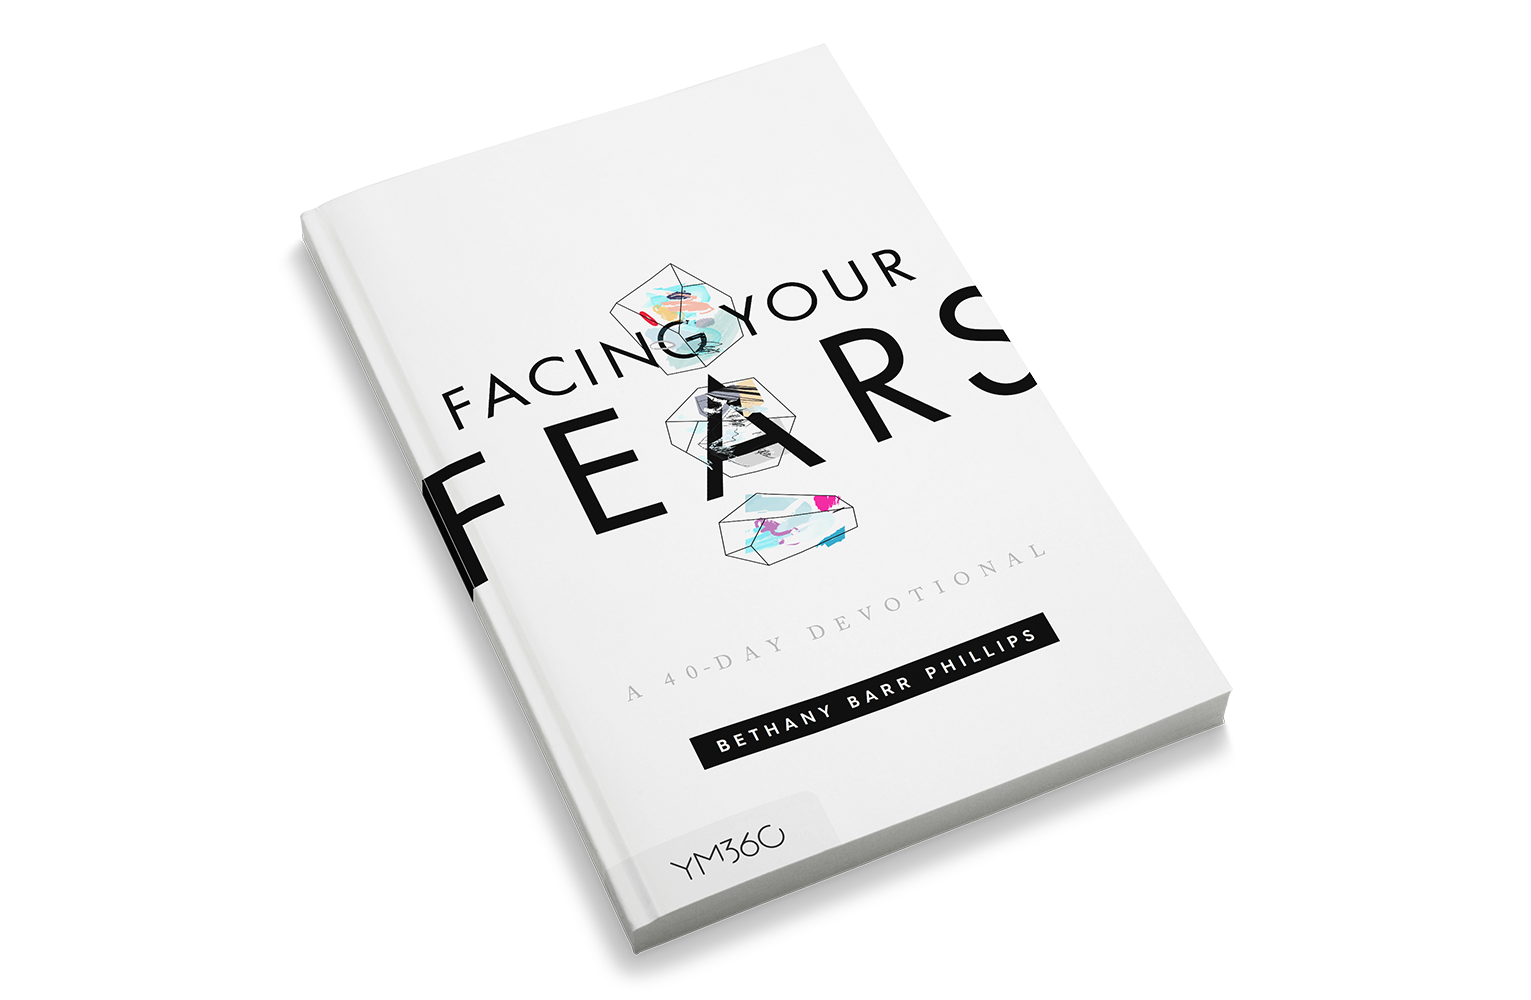 Facing Your Fears: A 40-Day Devotional